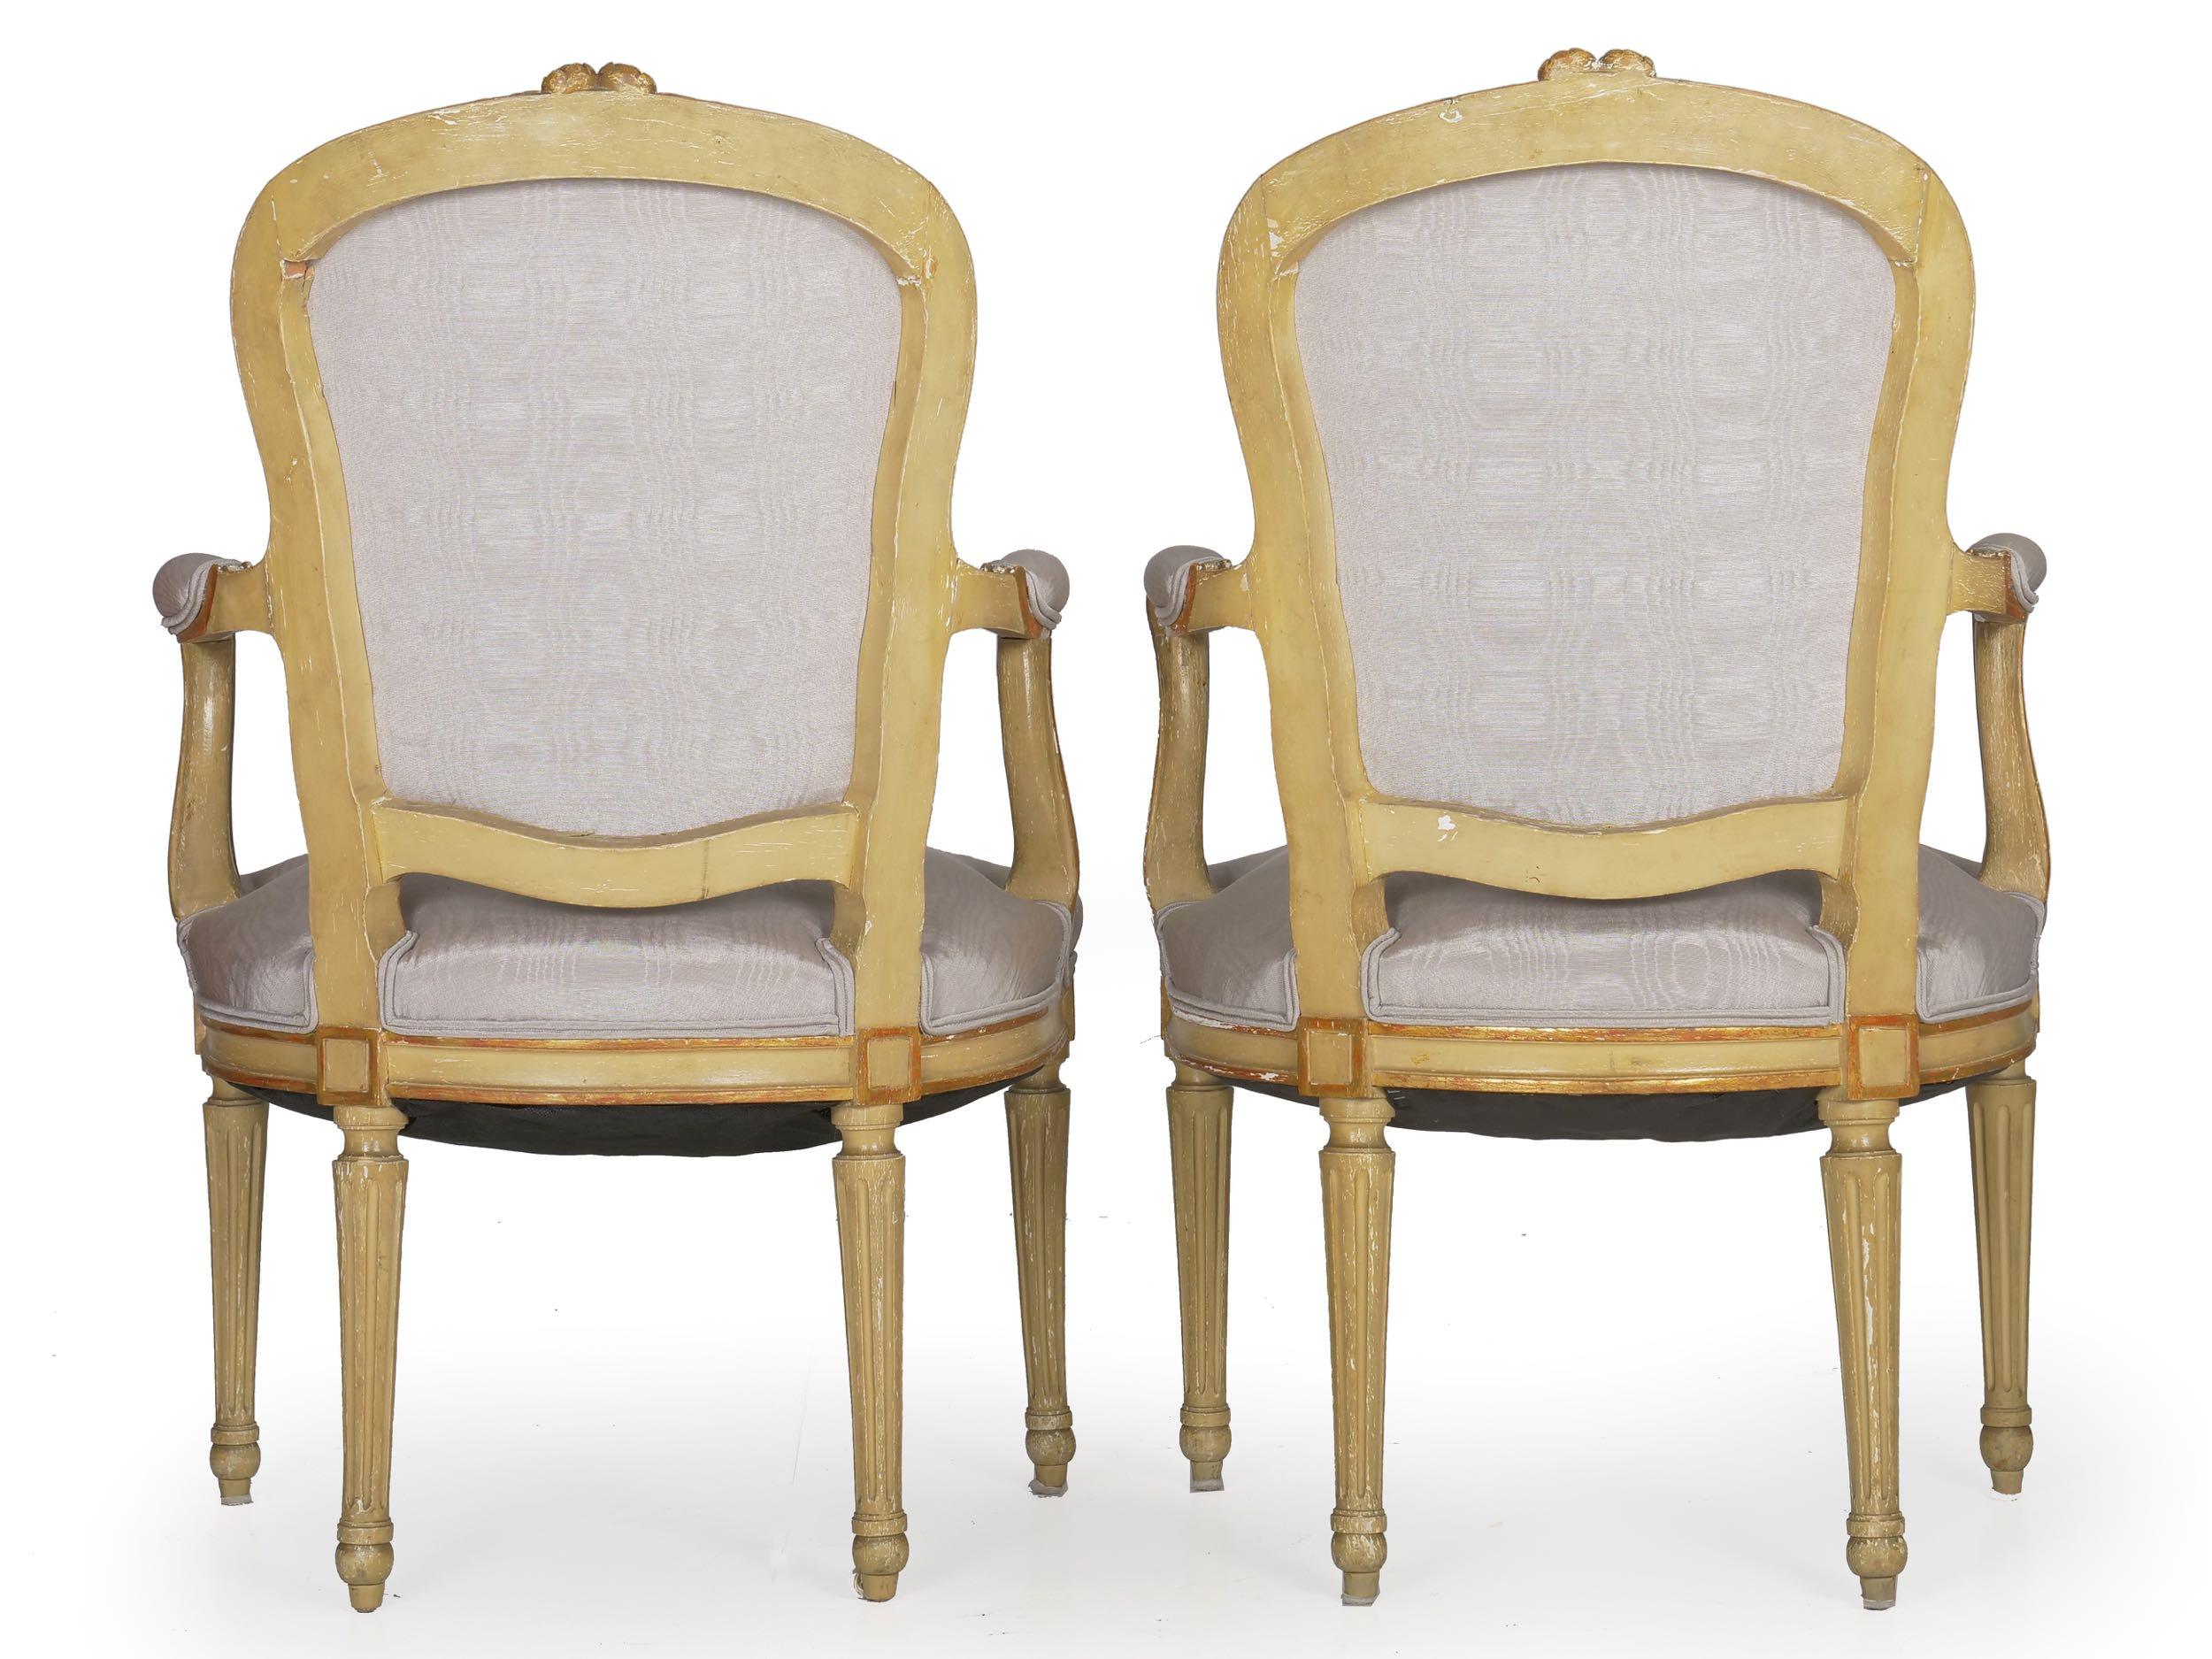 Fabric French Louis XVI Style Antique Distressed Painted Armchairs, 19th Century, Pair